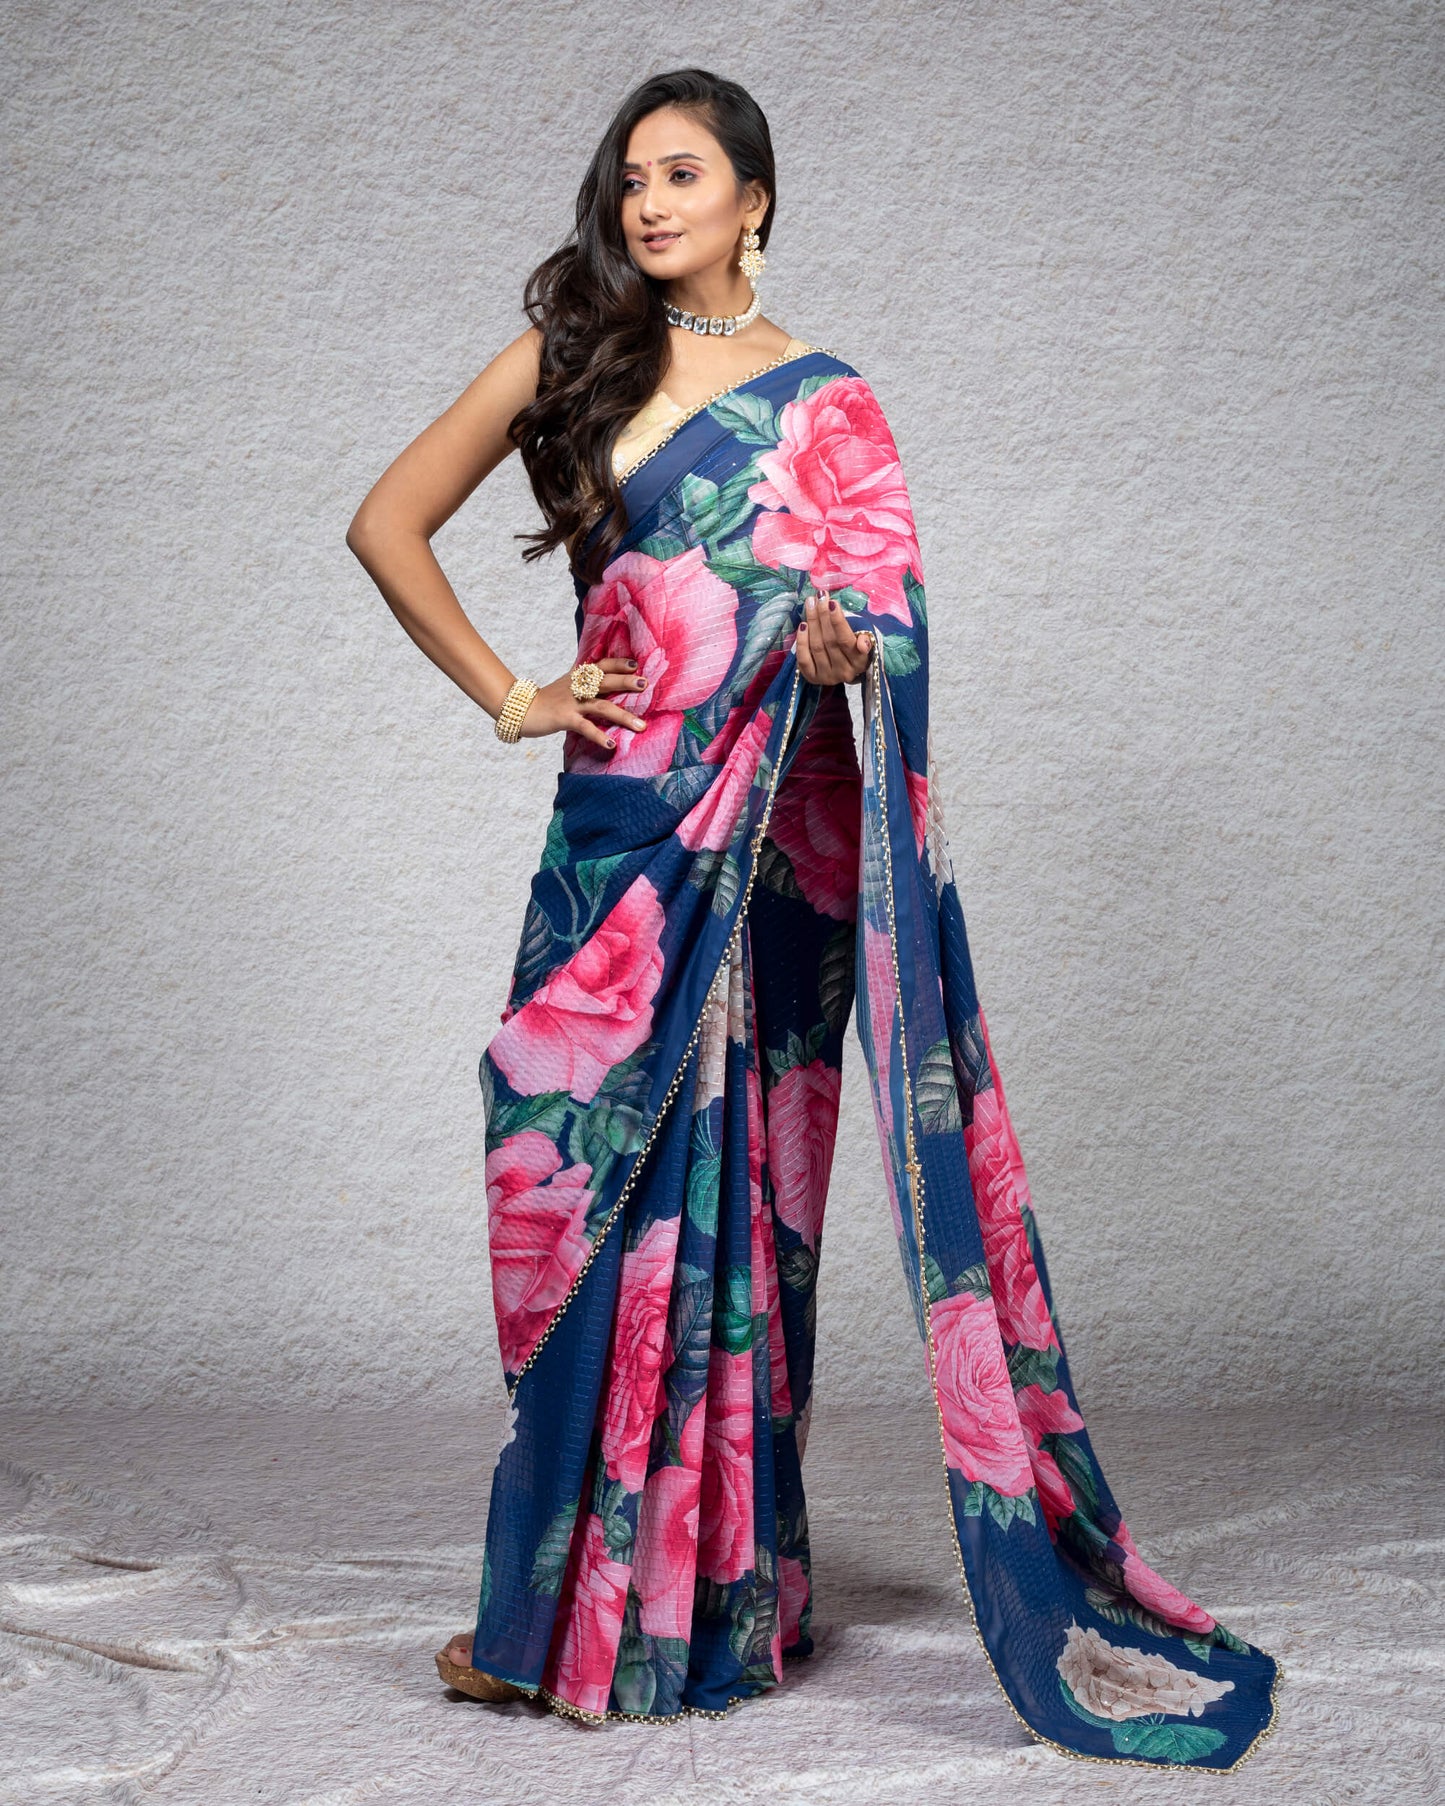 Yale Blue And Pink Floral Pattren Sequins Georgette Saree With Tubular Beads Pearl Work Lace Border